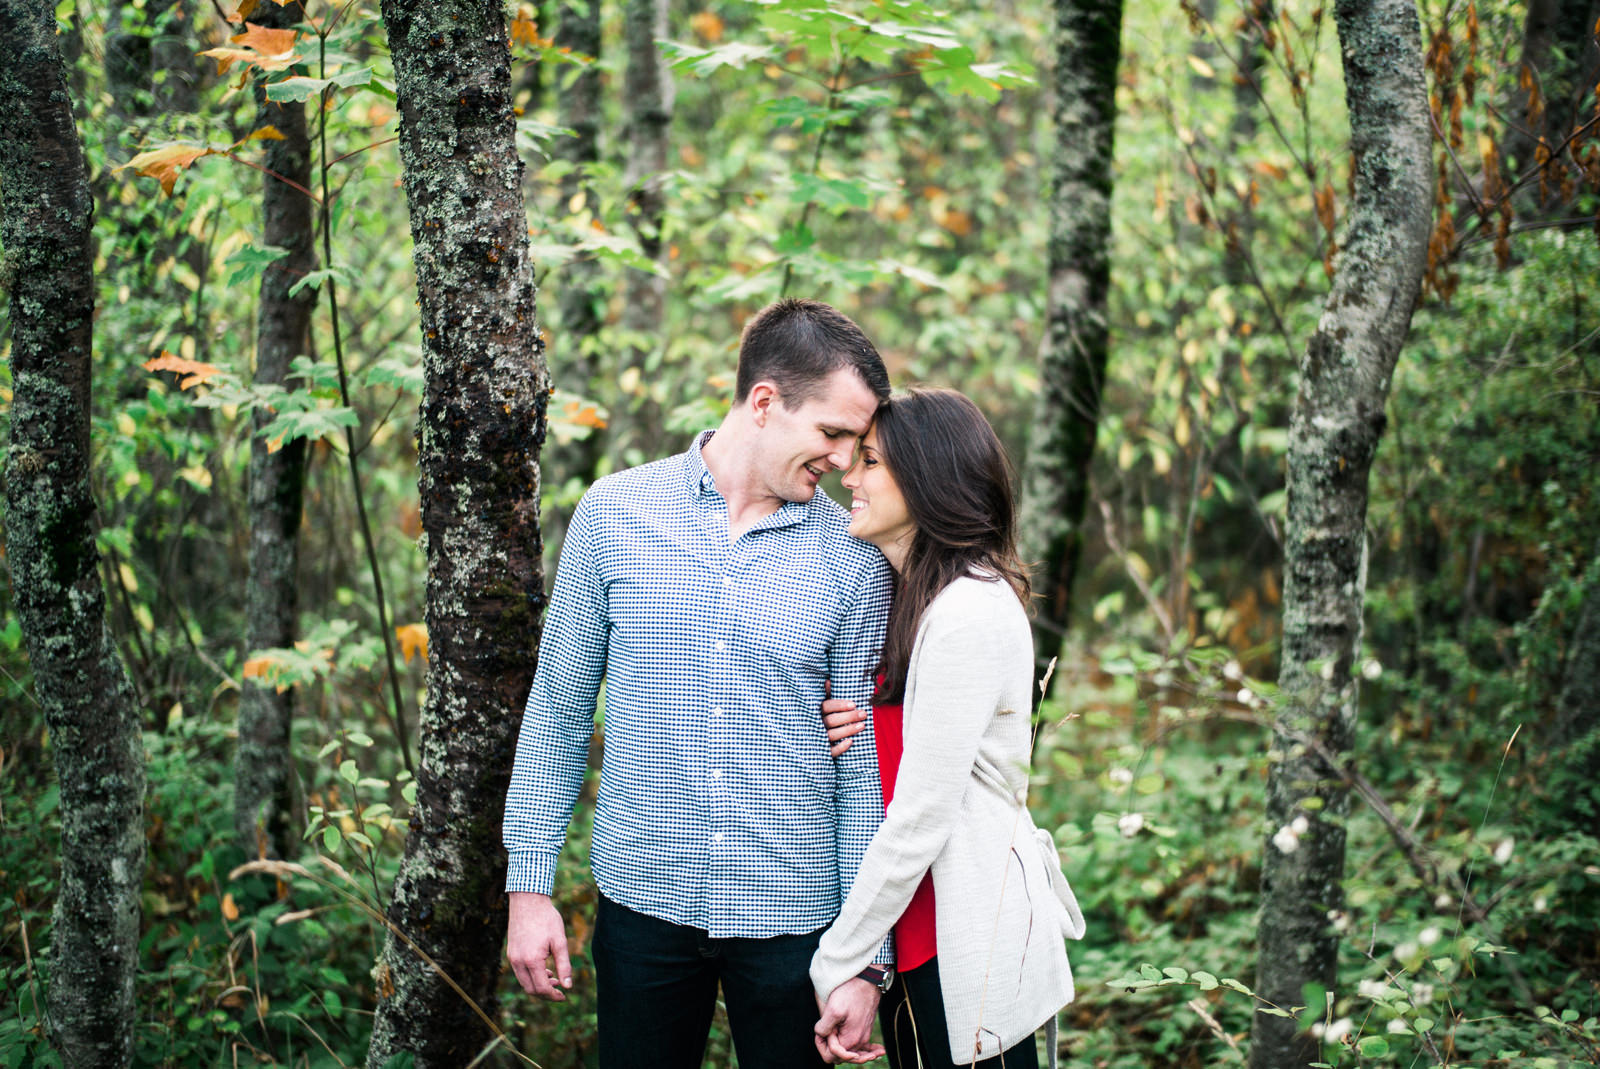 166-washington-engagement-session-at-discovery-park-by-ryan-flynn.jpg